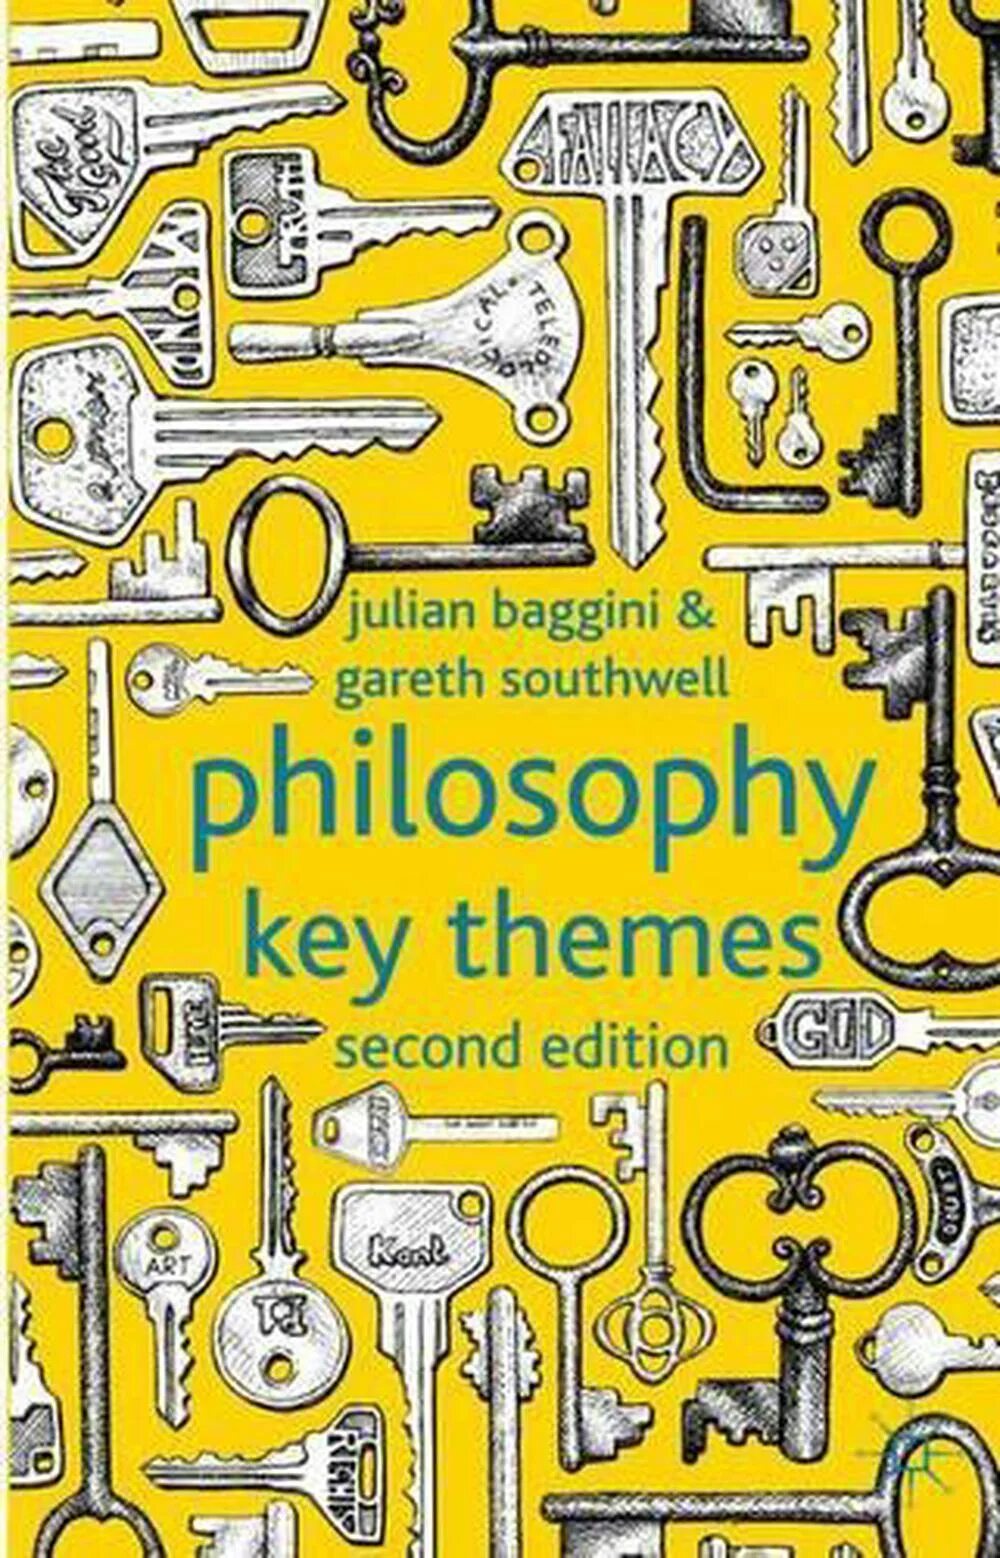 The Philosophy book. The Beginner's Guide обложка. Philosophy for Beginners. Beginner book Yellow.